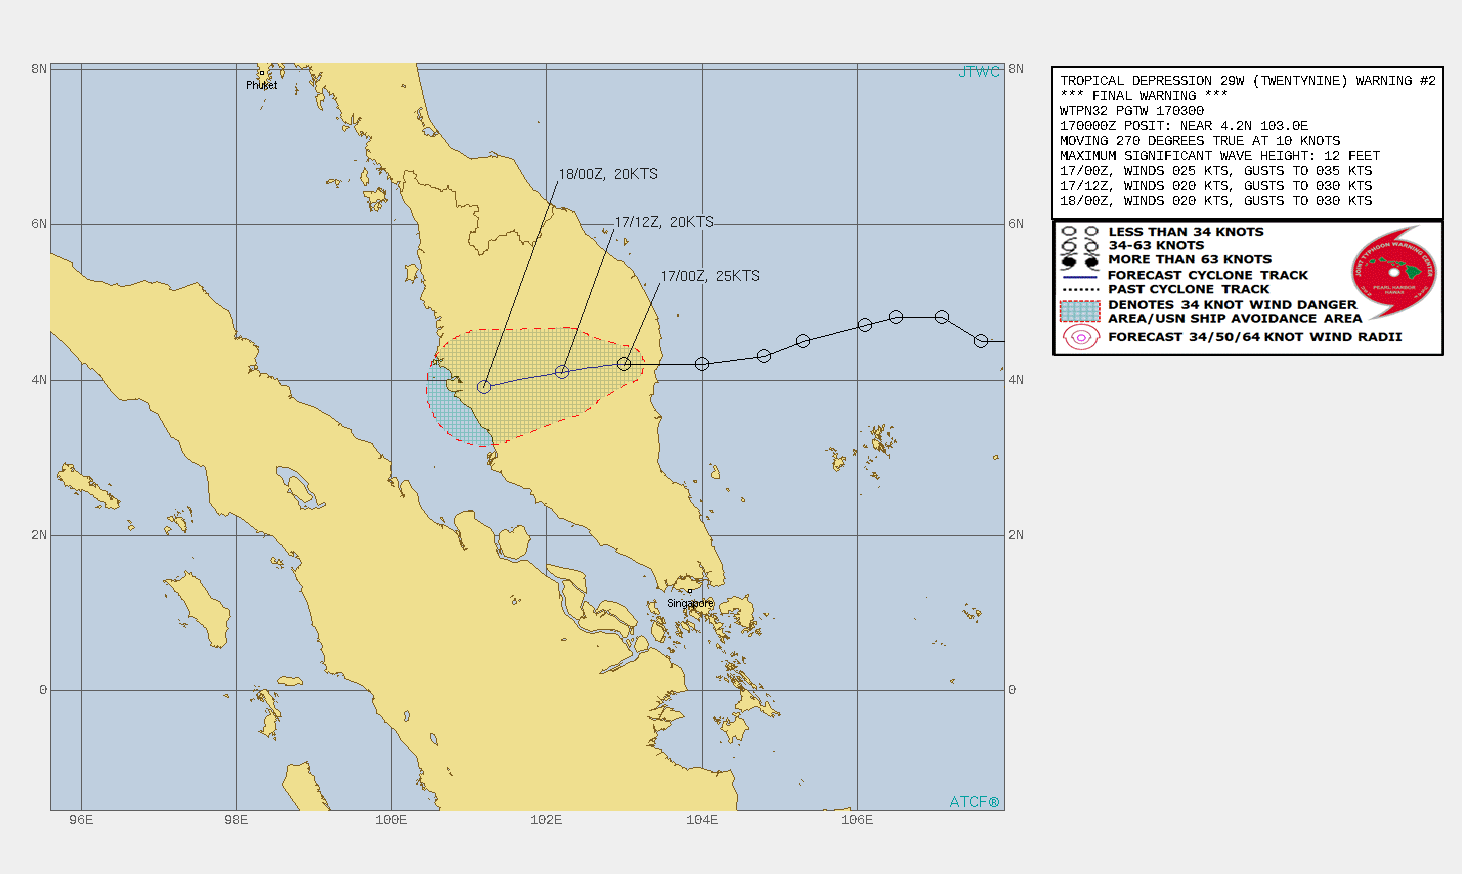 TROPICAL DEPRESSION 29W (TWENTYNINE), LOCATED APPROXIMATELY 350 KM NORTH-NORTHWEST OF SINGAPORE, HAS TRACKED WESTWARD AT 19 KM/H OVER THE PAST SIX HOURS. ANIMATED VISIBLE IMAGERY, RADAR DATA FROM THE MALAYSIA  RADAR NETWORK AND SURFACE OBSERVATIONS FROM KUANTAN, MALAYSIS, INDICATE THAT TD 28W MADE LANDFALL JUST NORTH OF KUANAN NEAR THE 162300Z HOUR AND HAS CONTINUED TO MOVE INLAND. THE ADVANCED DVORAK TECHNIQUE (ADT)  AND SATCON ESTIMATES PRIOR TO LANDFALL WERE AS HIGH AS T2.5, INDICATING THAT THE SYSTEM LIKELY BRIEFLY REACHED AT LEAST 30 KNOTS PRIOR TO  LANDFALL. HOWEVER NOW THAT THE SYSTEM IS OVER LAND, IT IS ALREADY  STARTING TO WEAKEN AND WILL DISSIPATE AS A TROPICAL CYCLONE OVER LAND WITHIN THE NEXT 12 TO 24 PRIOR TO REACHING THE WEST COAST OF MALAYSIA. IT IS LIKELY THAT A WEAK, REMNANT CIRCULATION WILL MOVE OFF THE WEST COAST, BUT IT IS NOT EXPECTED TO REDEVELOP AT THIS TIME. THIS IS THE FINAL WARNING ON THIS SYSTEM BY THE JOINT TYPHOON WRNCEN PEARL HARBOR HI. THE SYSTEM WILL BE CLOSELY MONITORED FOR SIGNS OF REGENERATION. MAXIMUM SIGNIFICANT WAVE HEIGHT AT 170000Z IS 12 FEET.